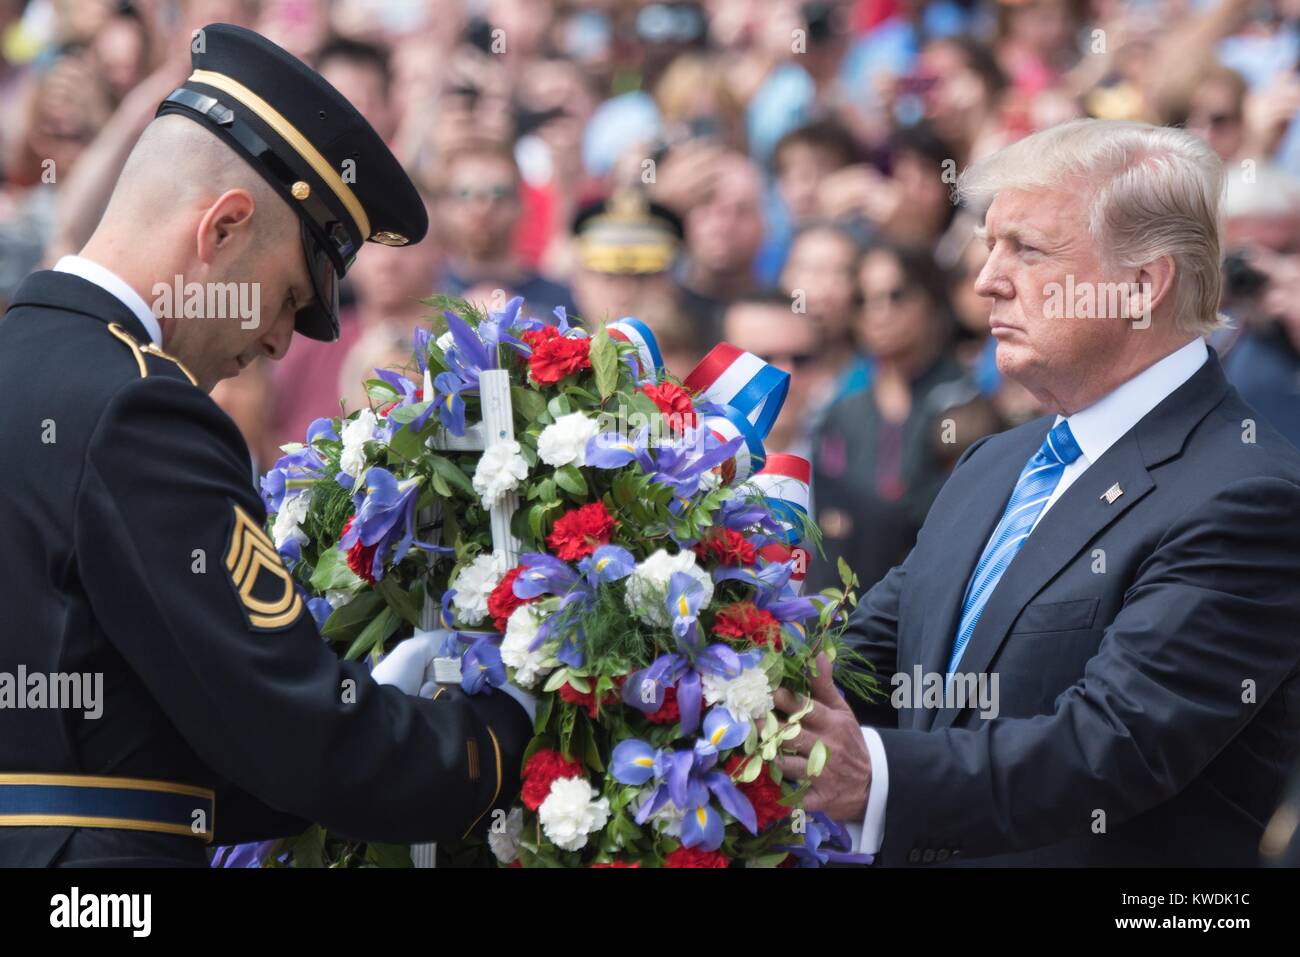 President Donald Trump lays a wreath at the Tomb of the Unknowns at Arlington National Cemetery. Memorial Day, May, 29, 2017 (BSLOC 2017 18 147) Stock Photo